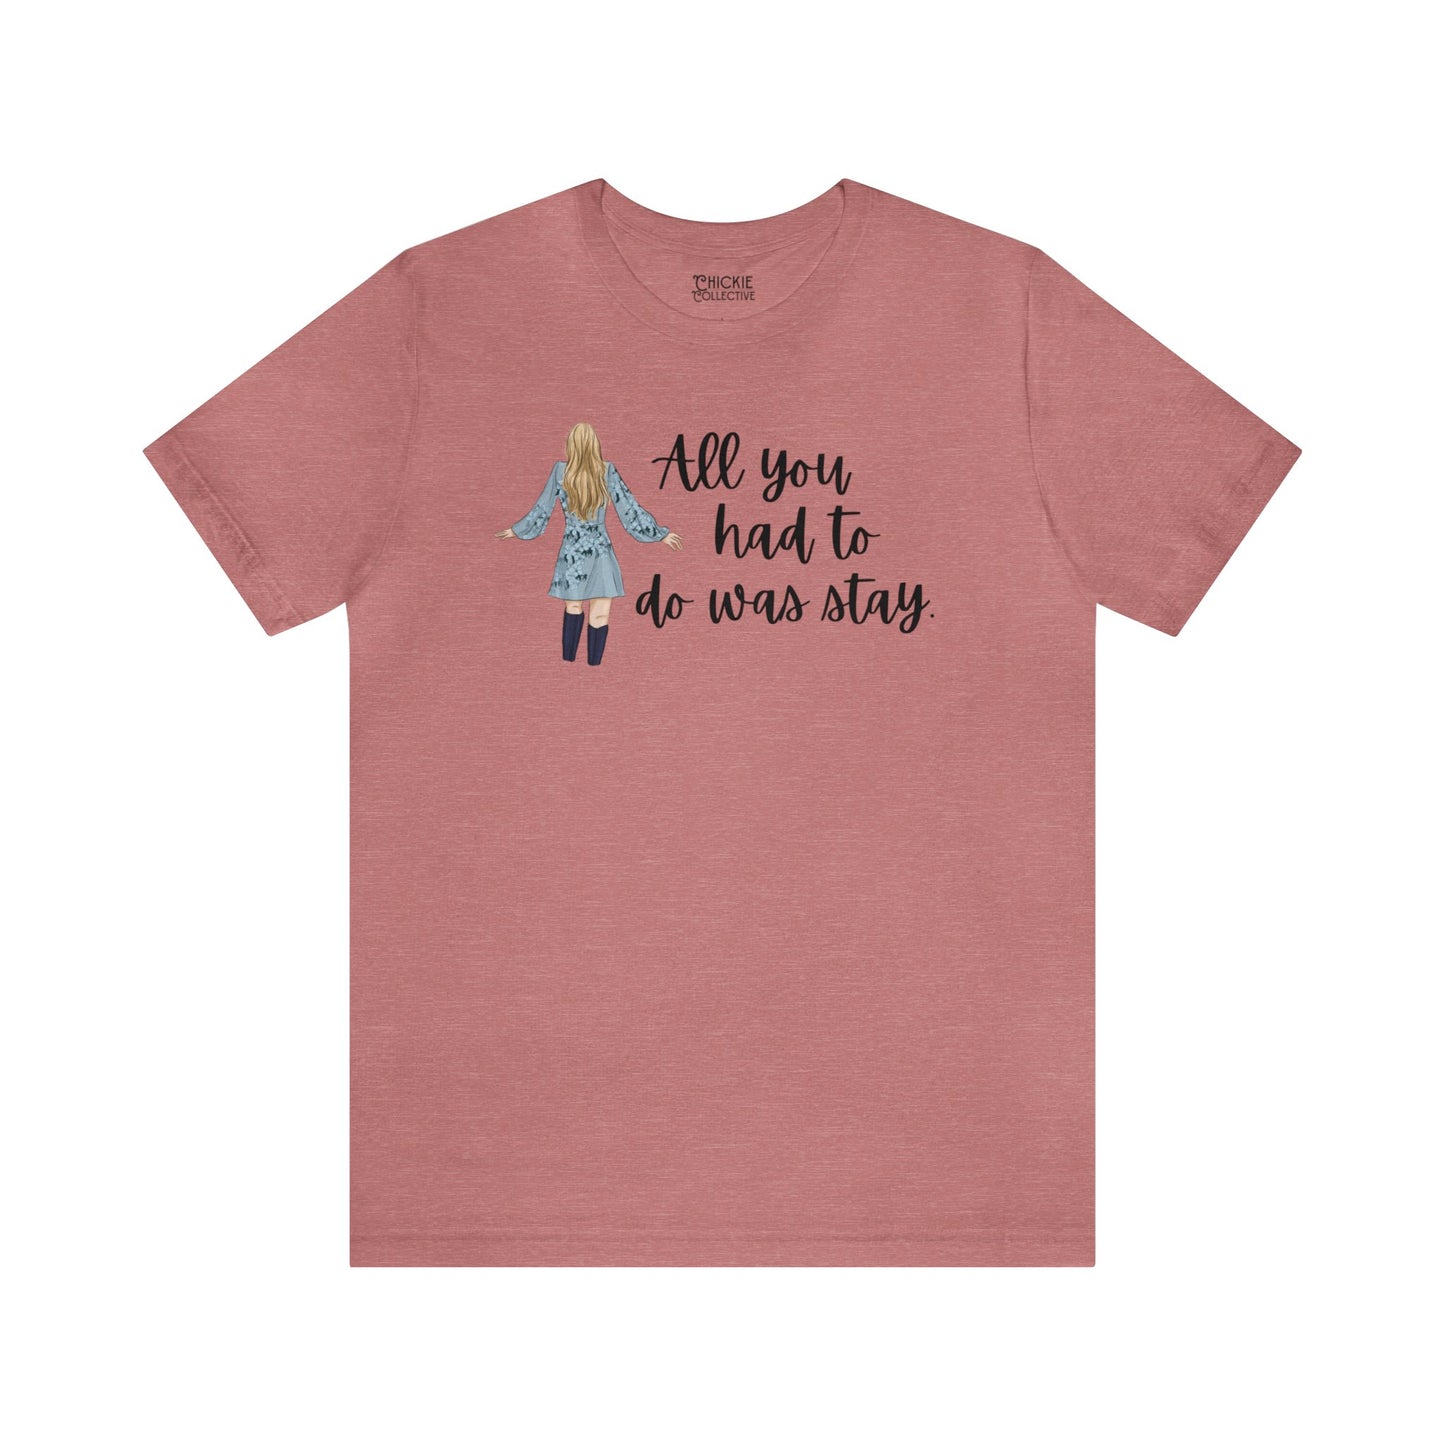 Taylor Swift Preppy Picture T-Shirt - All You Had To Do Was Stay